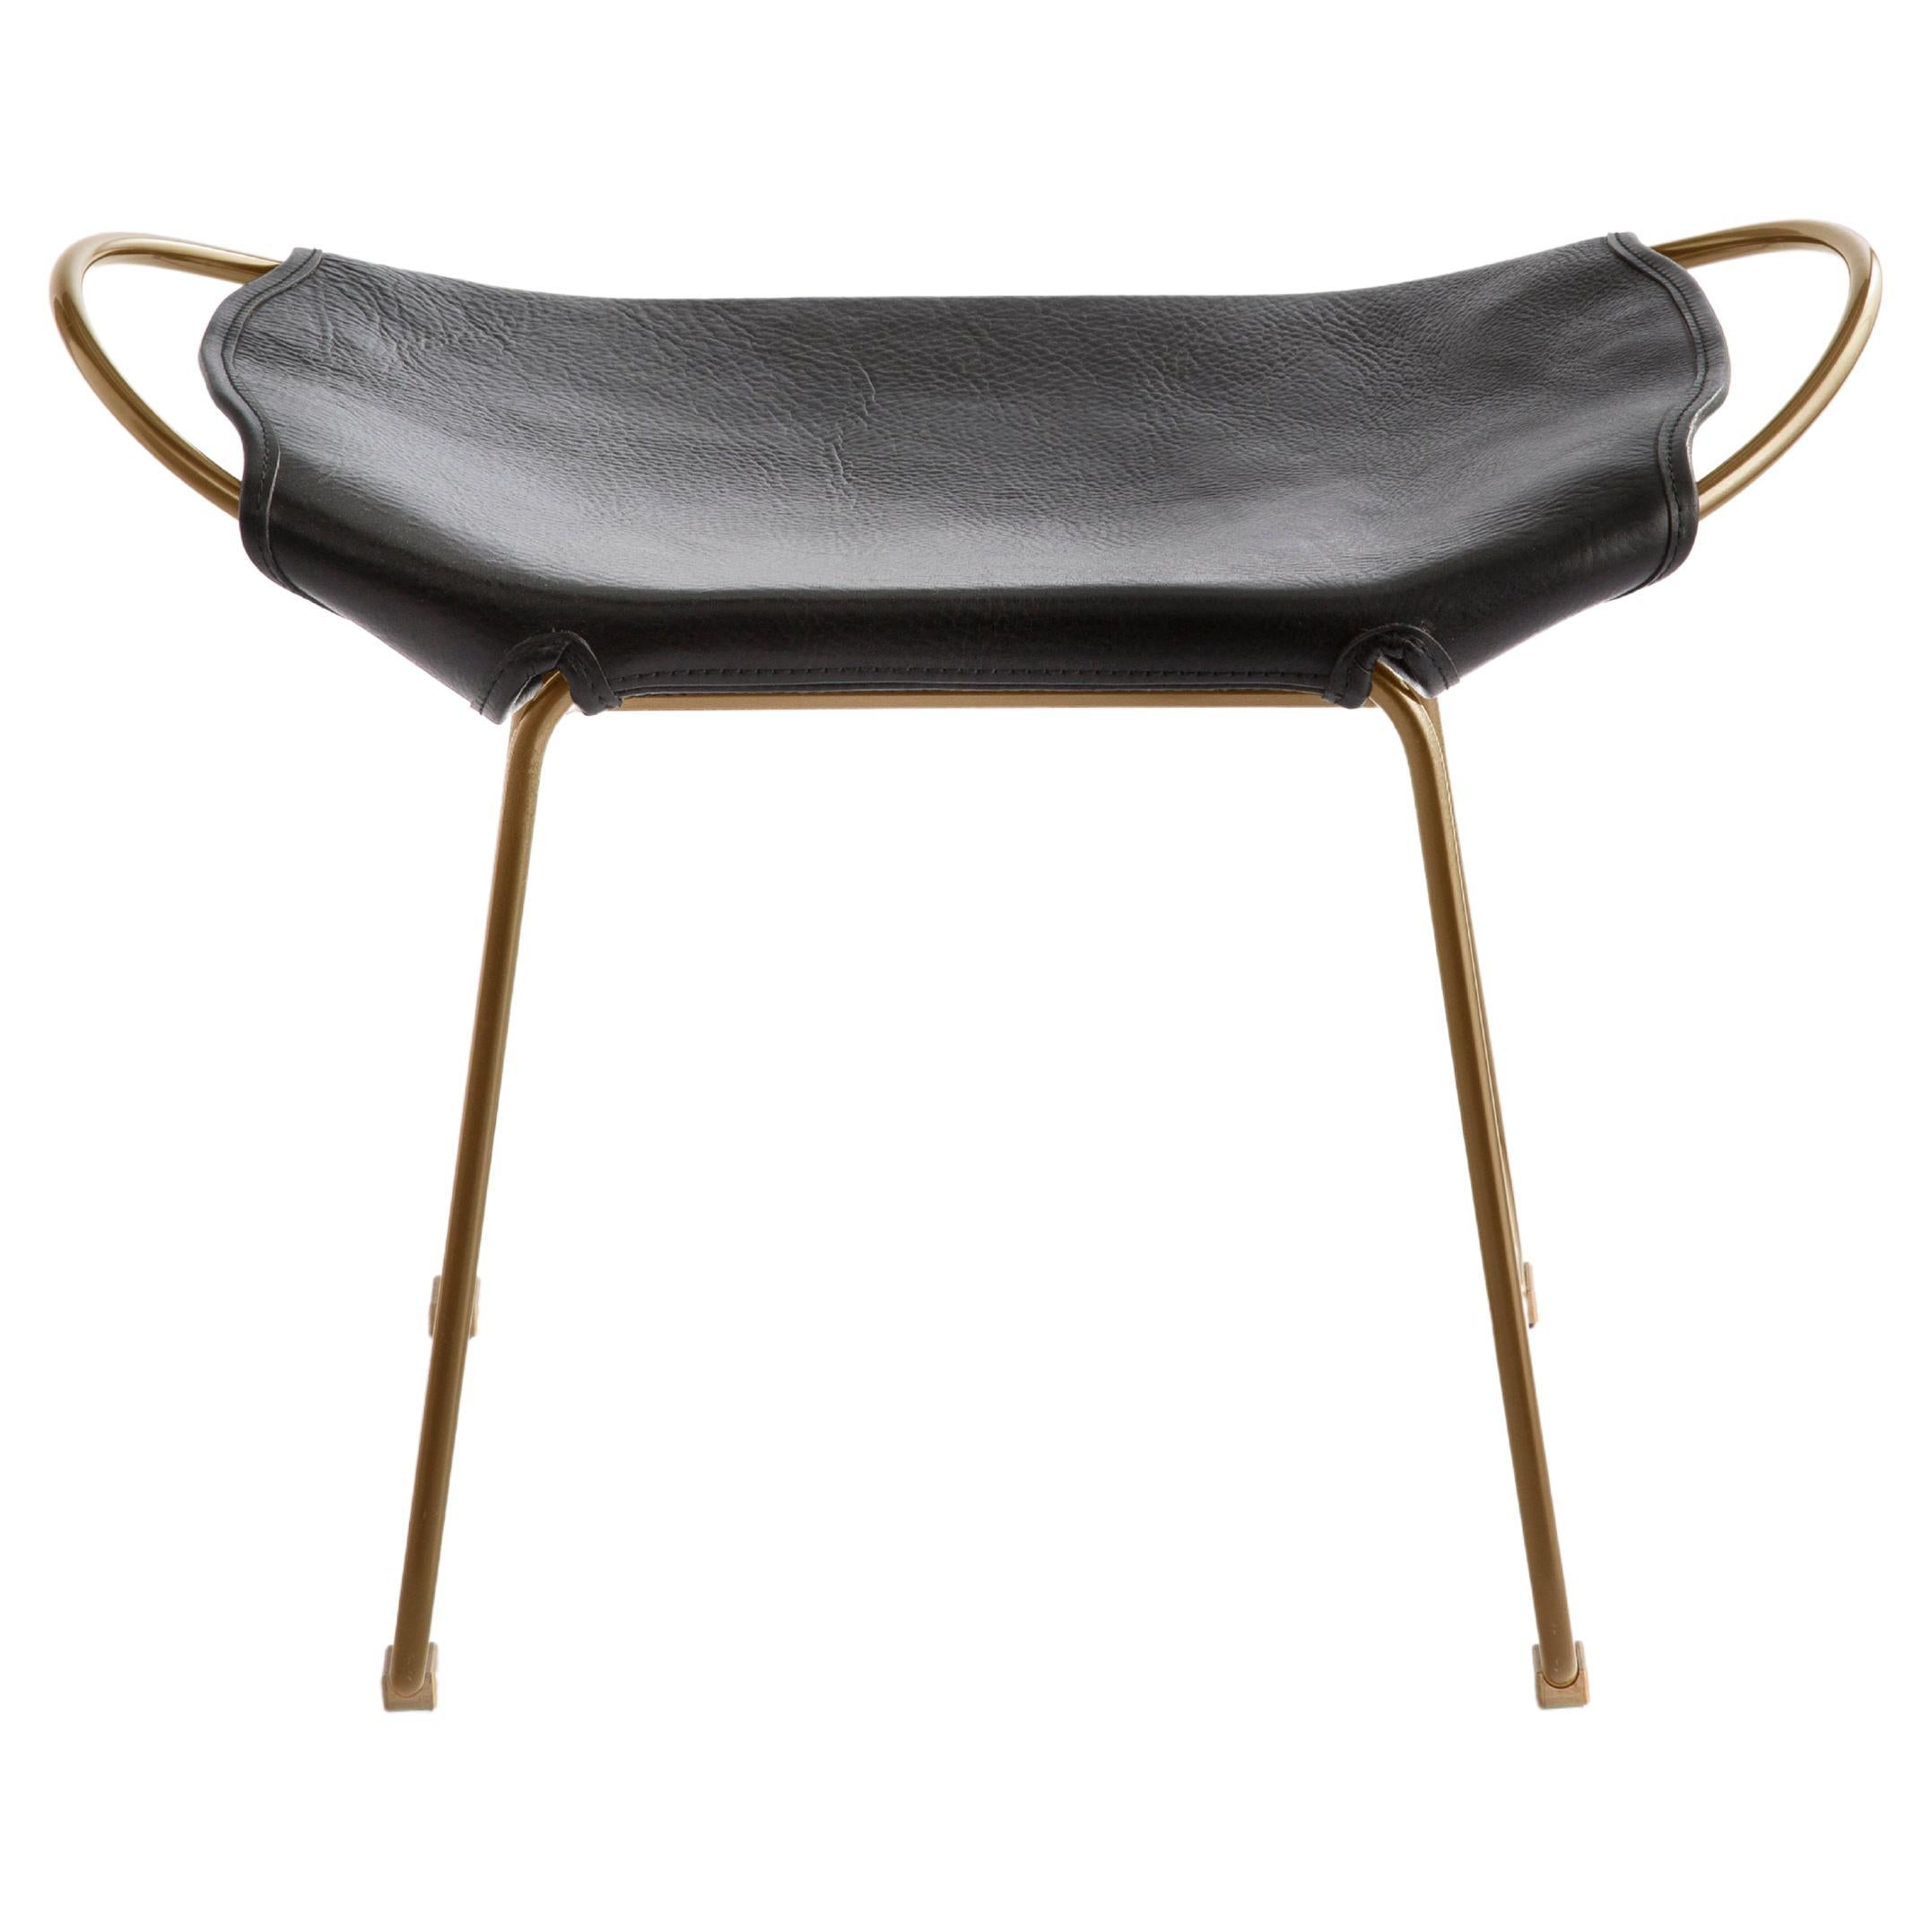 Footstool, Brass Steel and Black Saddle Leather, Modern Style, Hug Collection